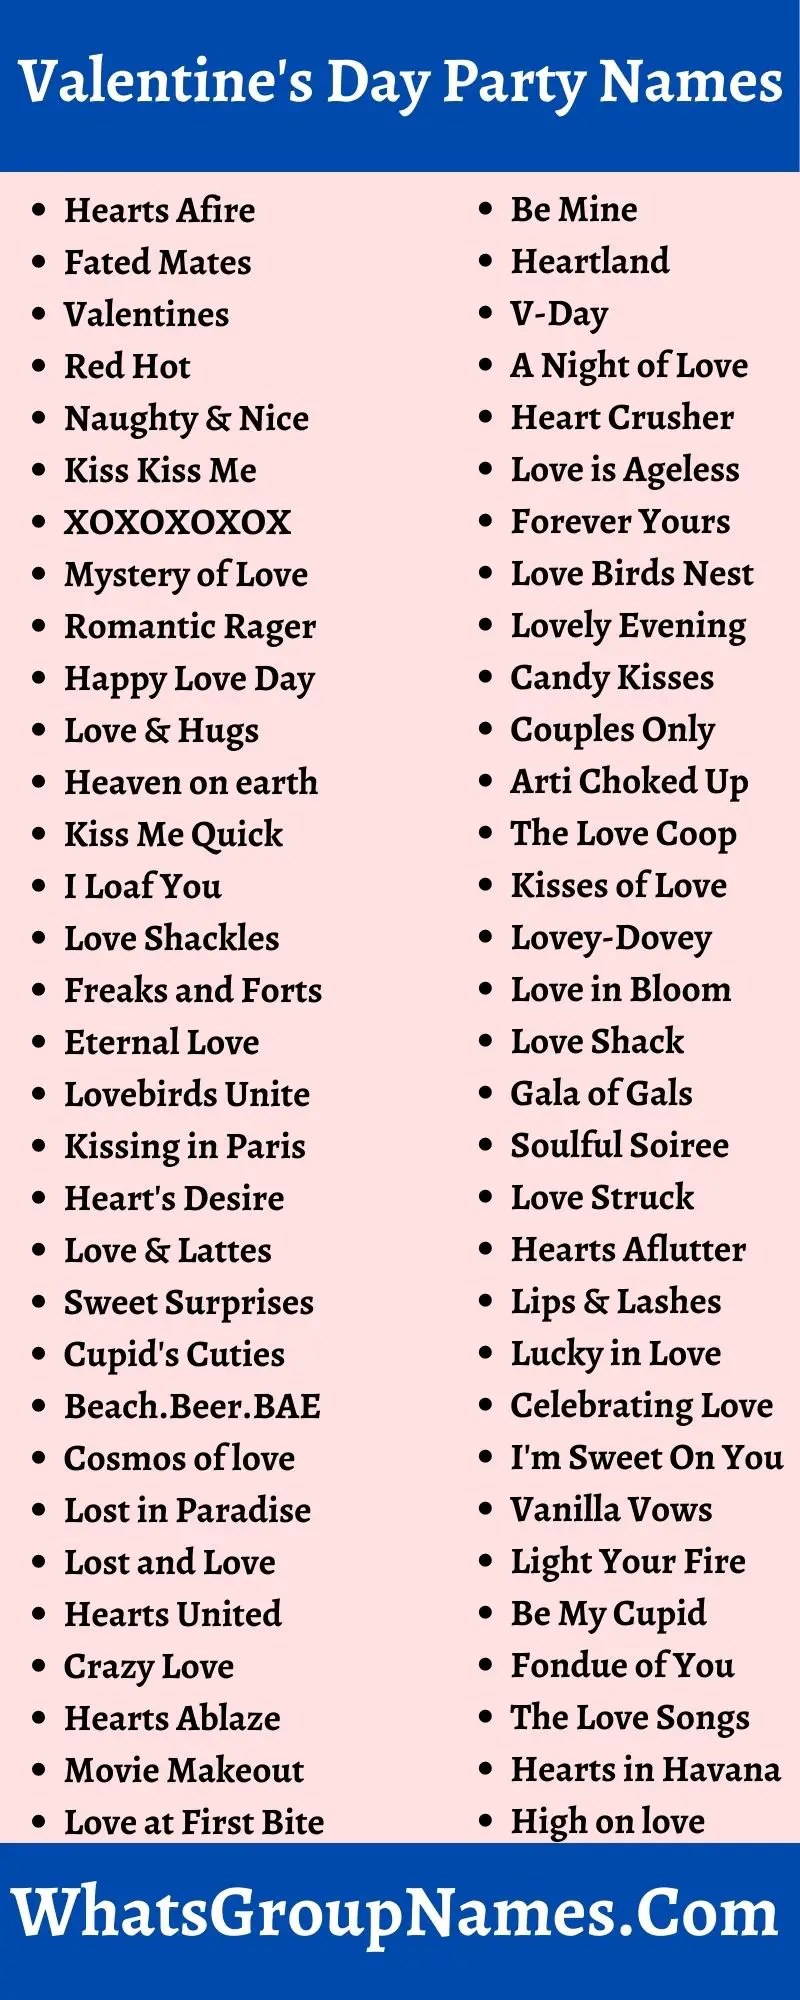 Valentine's Day Party Names